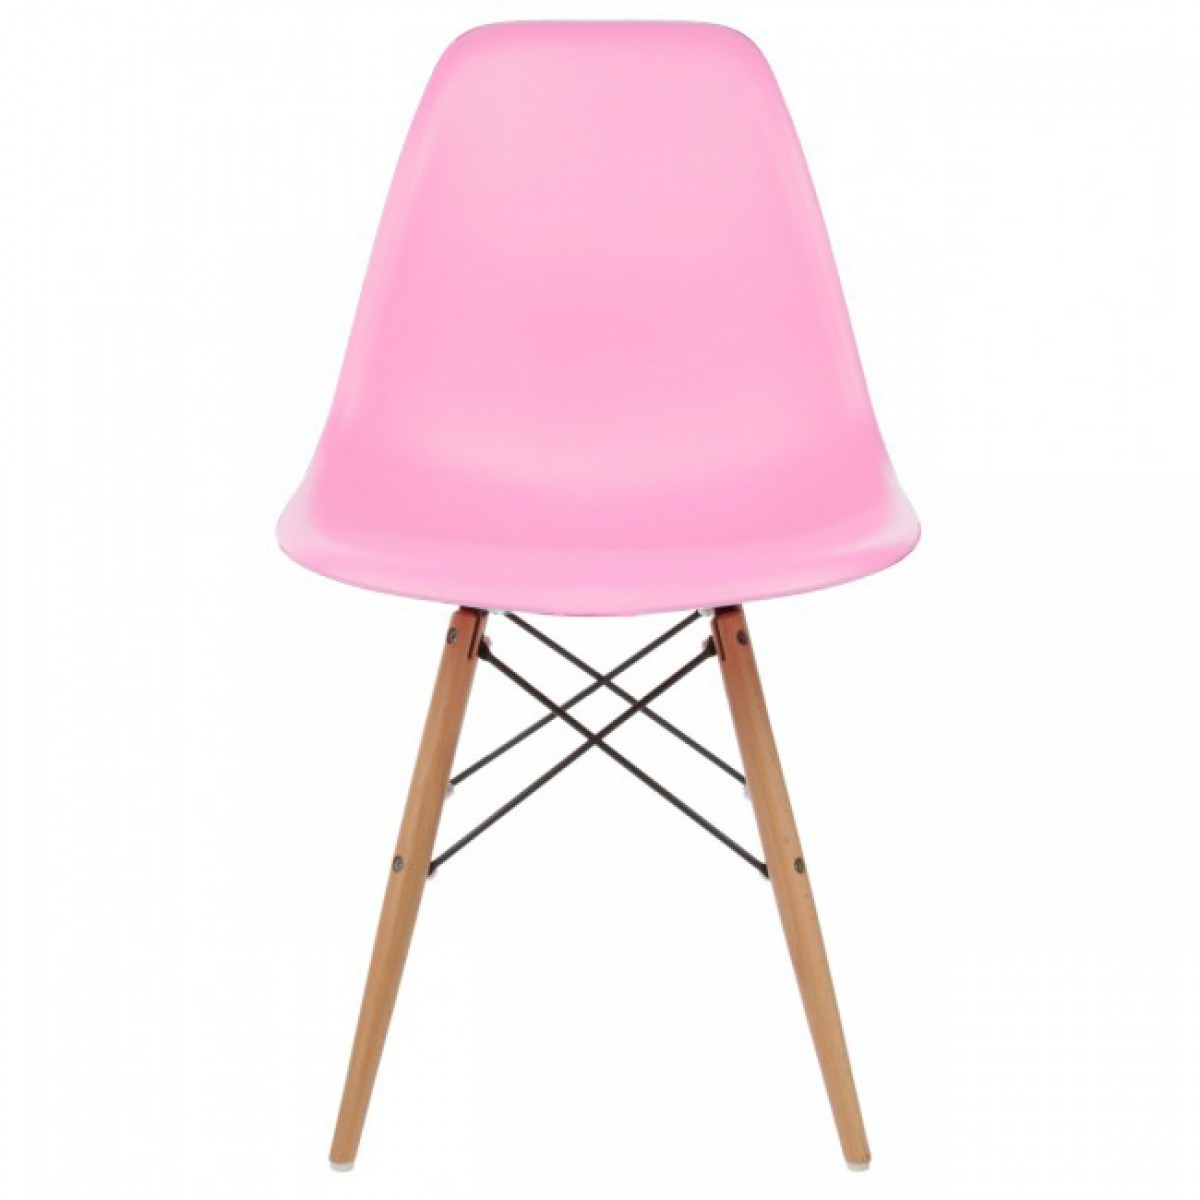 Eames Style DSW Molded Pink Plastic Dining Shell Chair